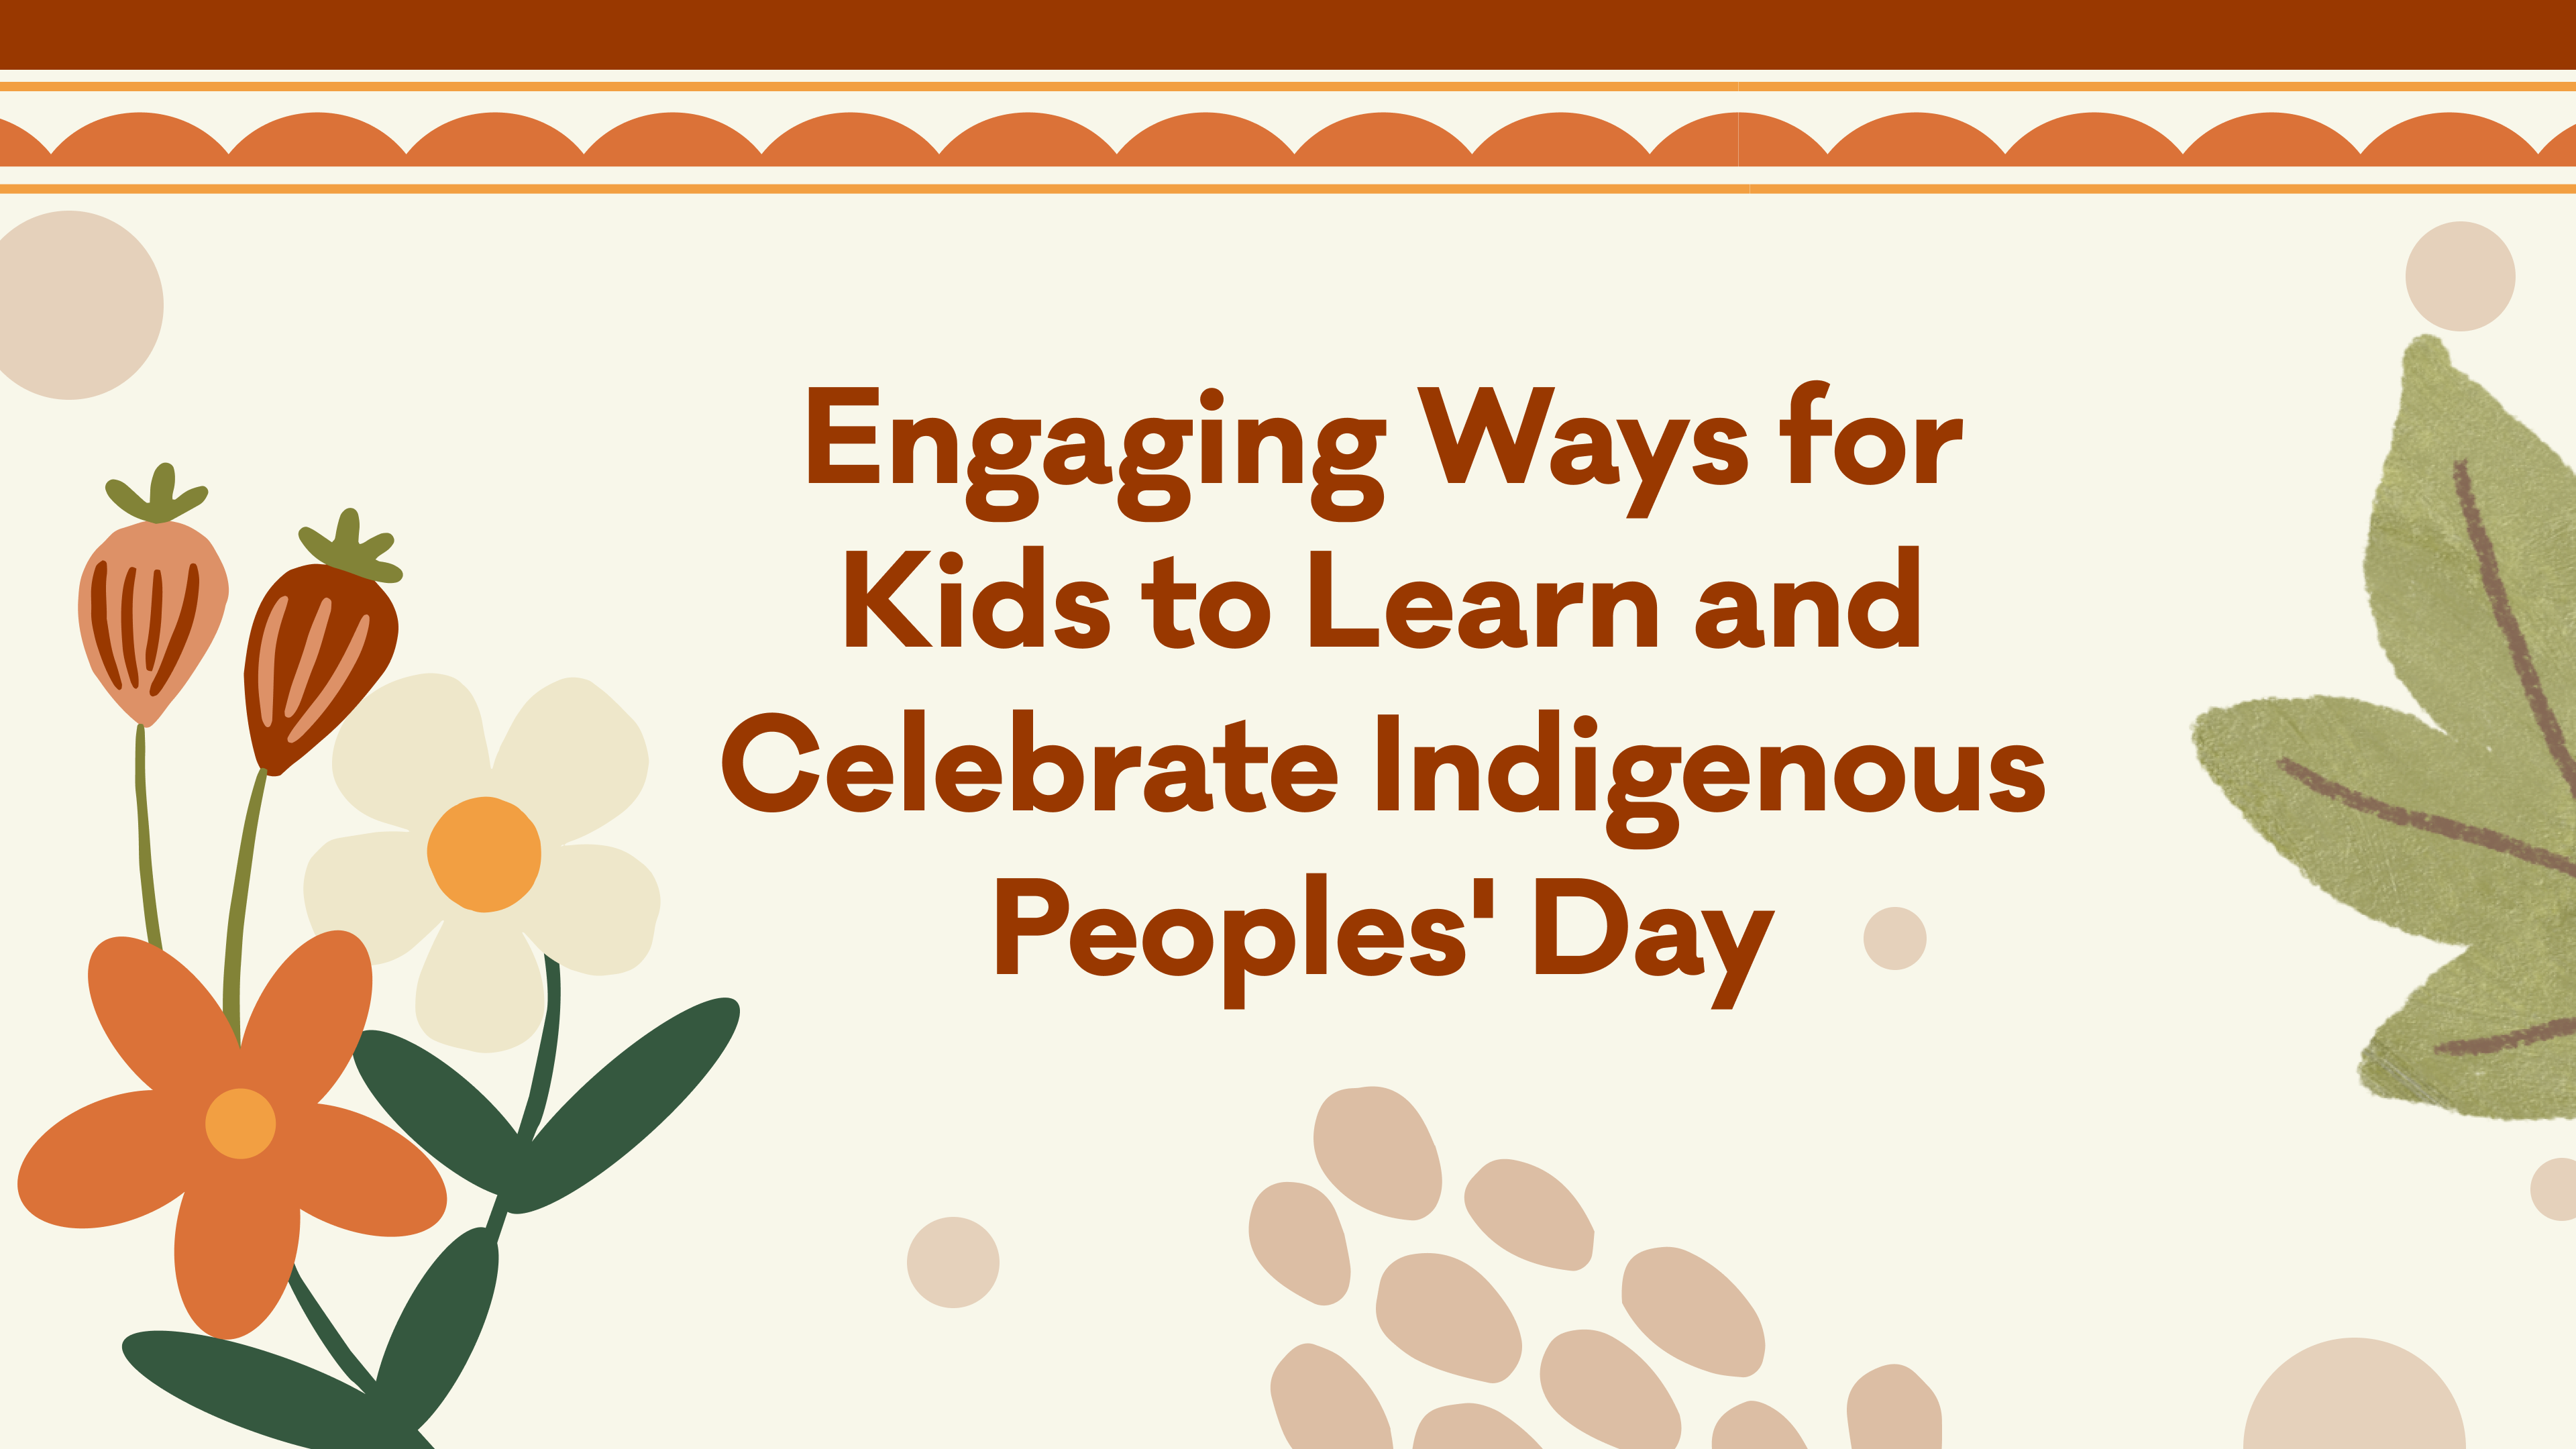 Engaging Ways for Kids to Learn and Celebrate Indigenous Peoples' Day